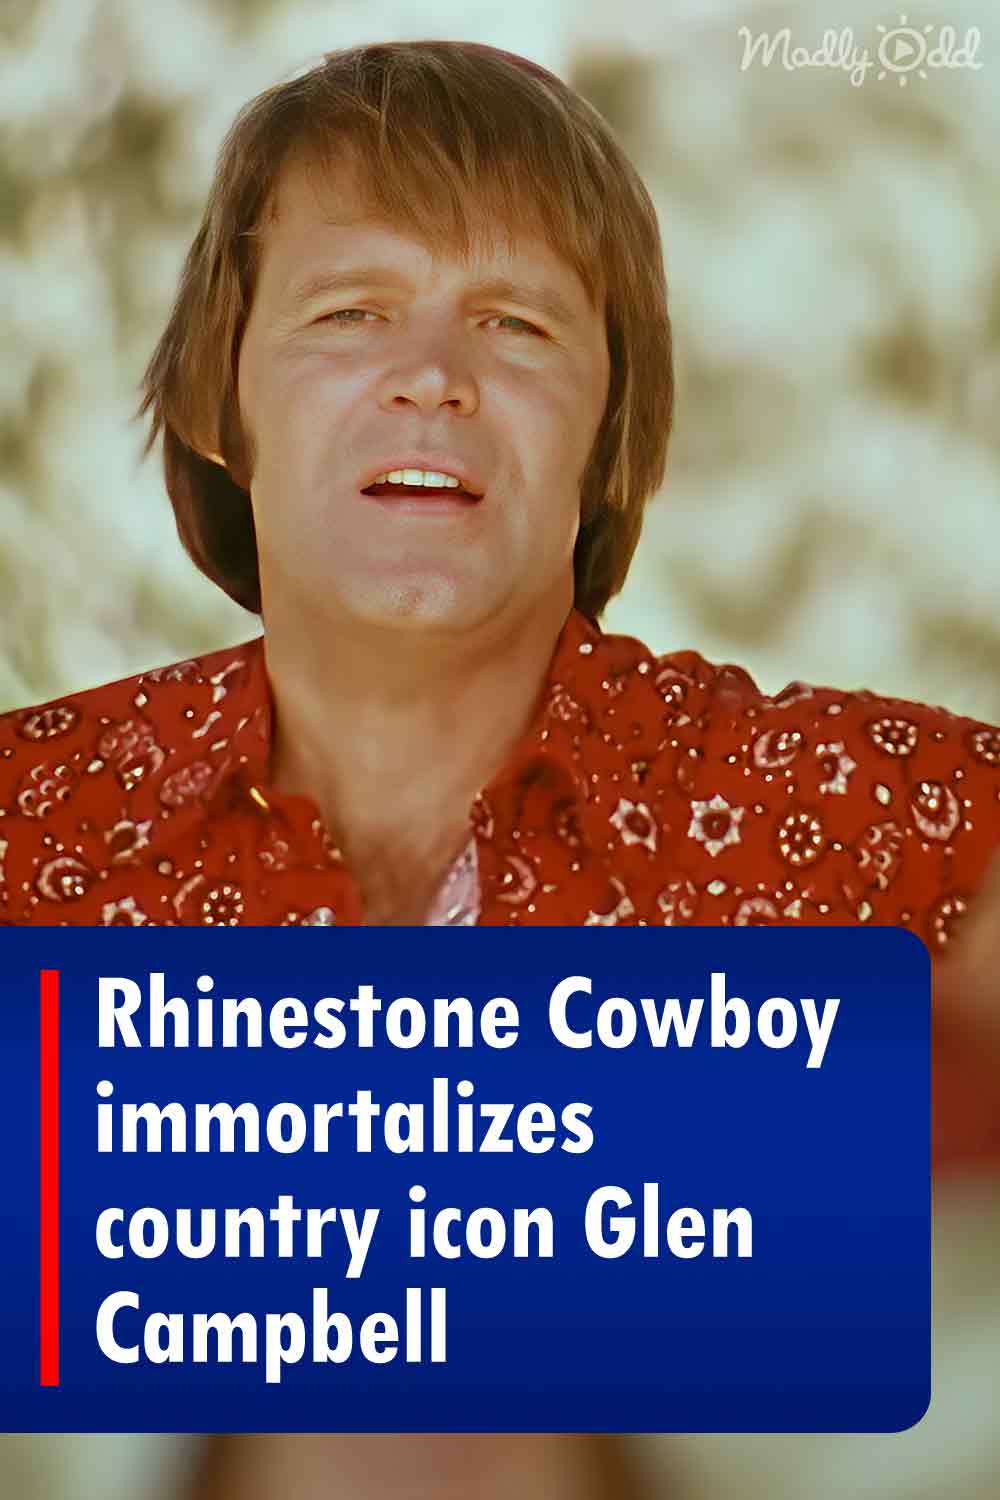 Rhinestone Cowboy immortalizes country icon Glen Campbell